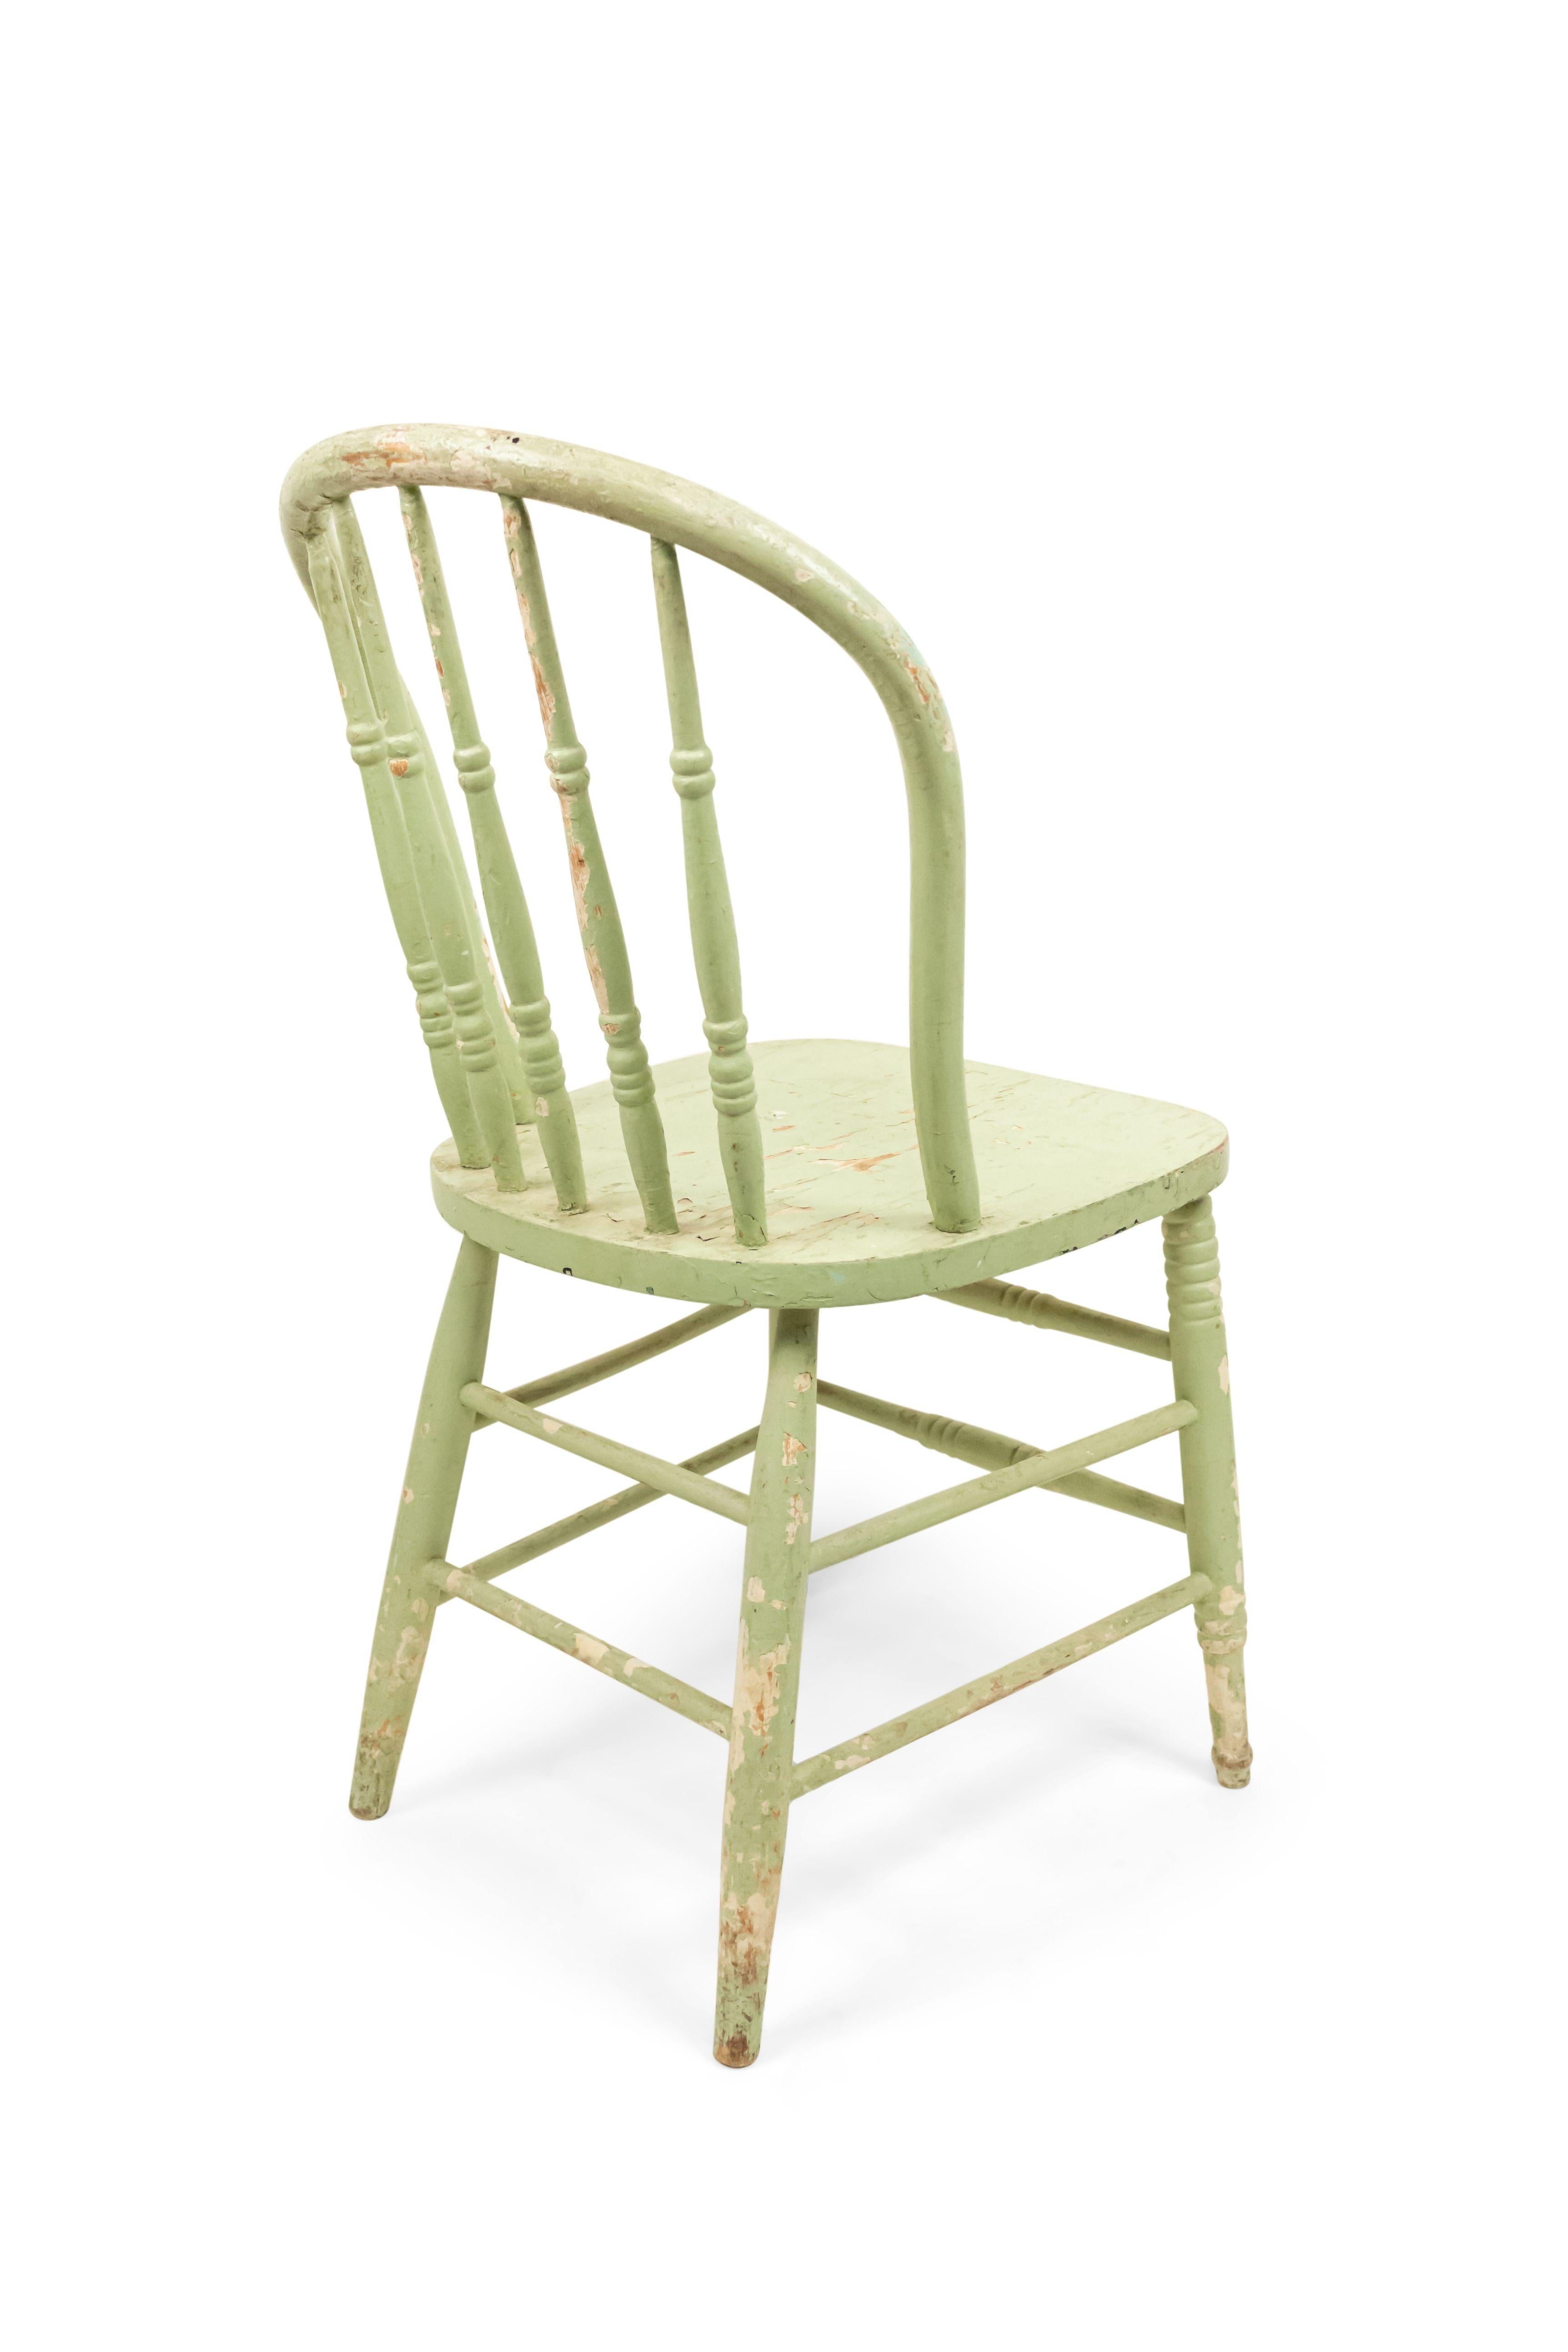 5 American Country Green Spindle Side Chairs For Sale 2